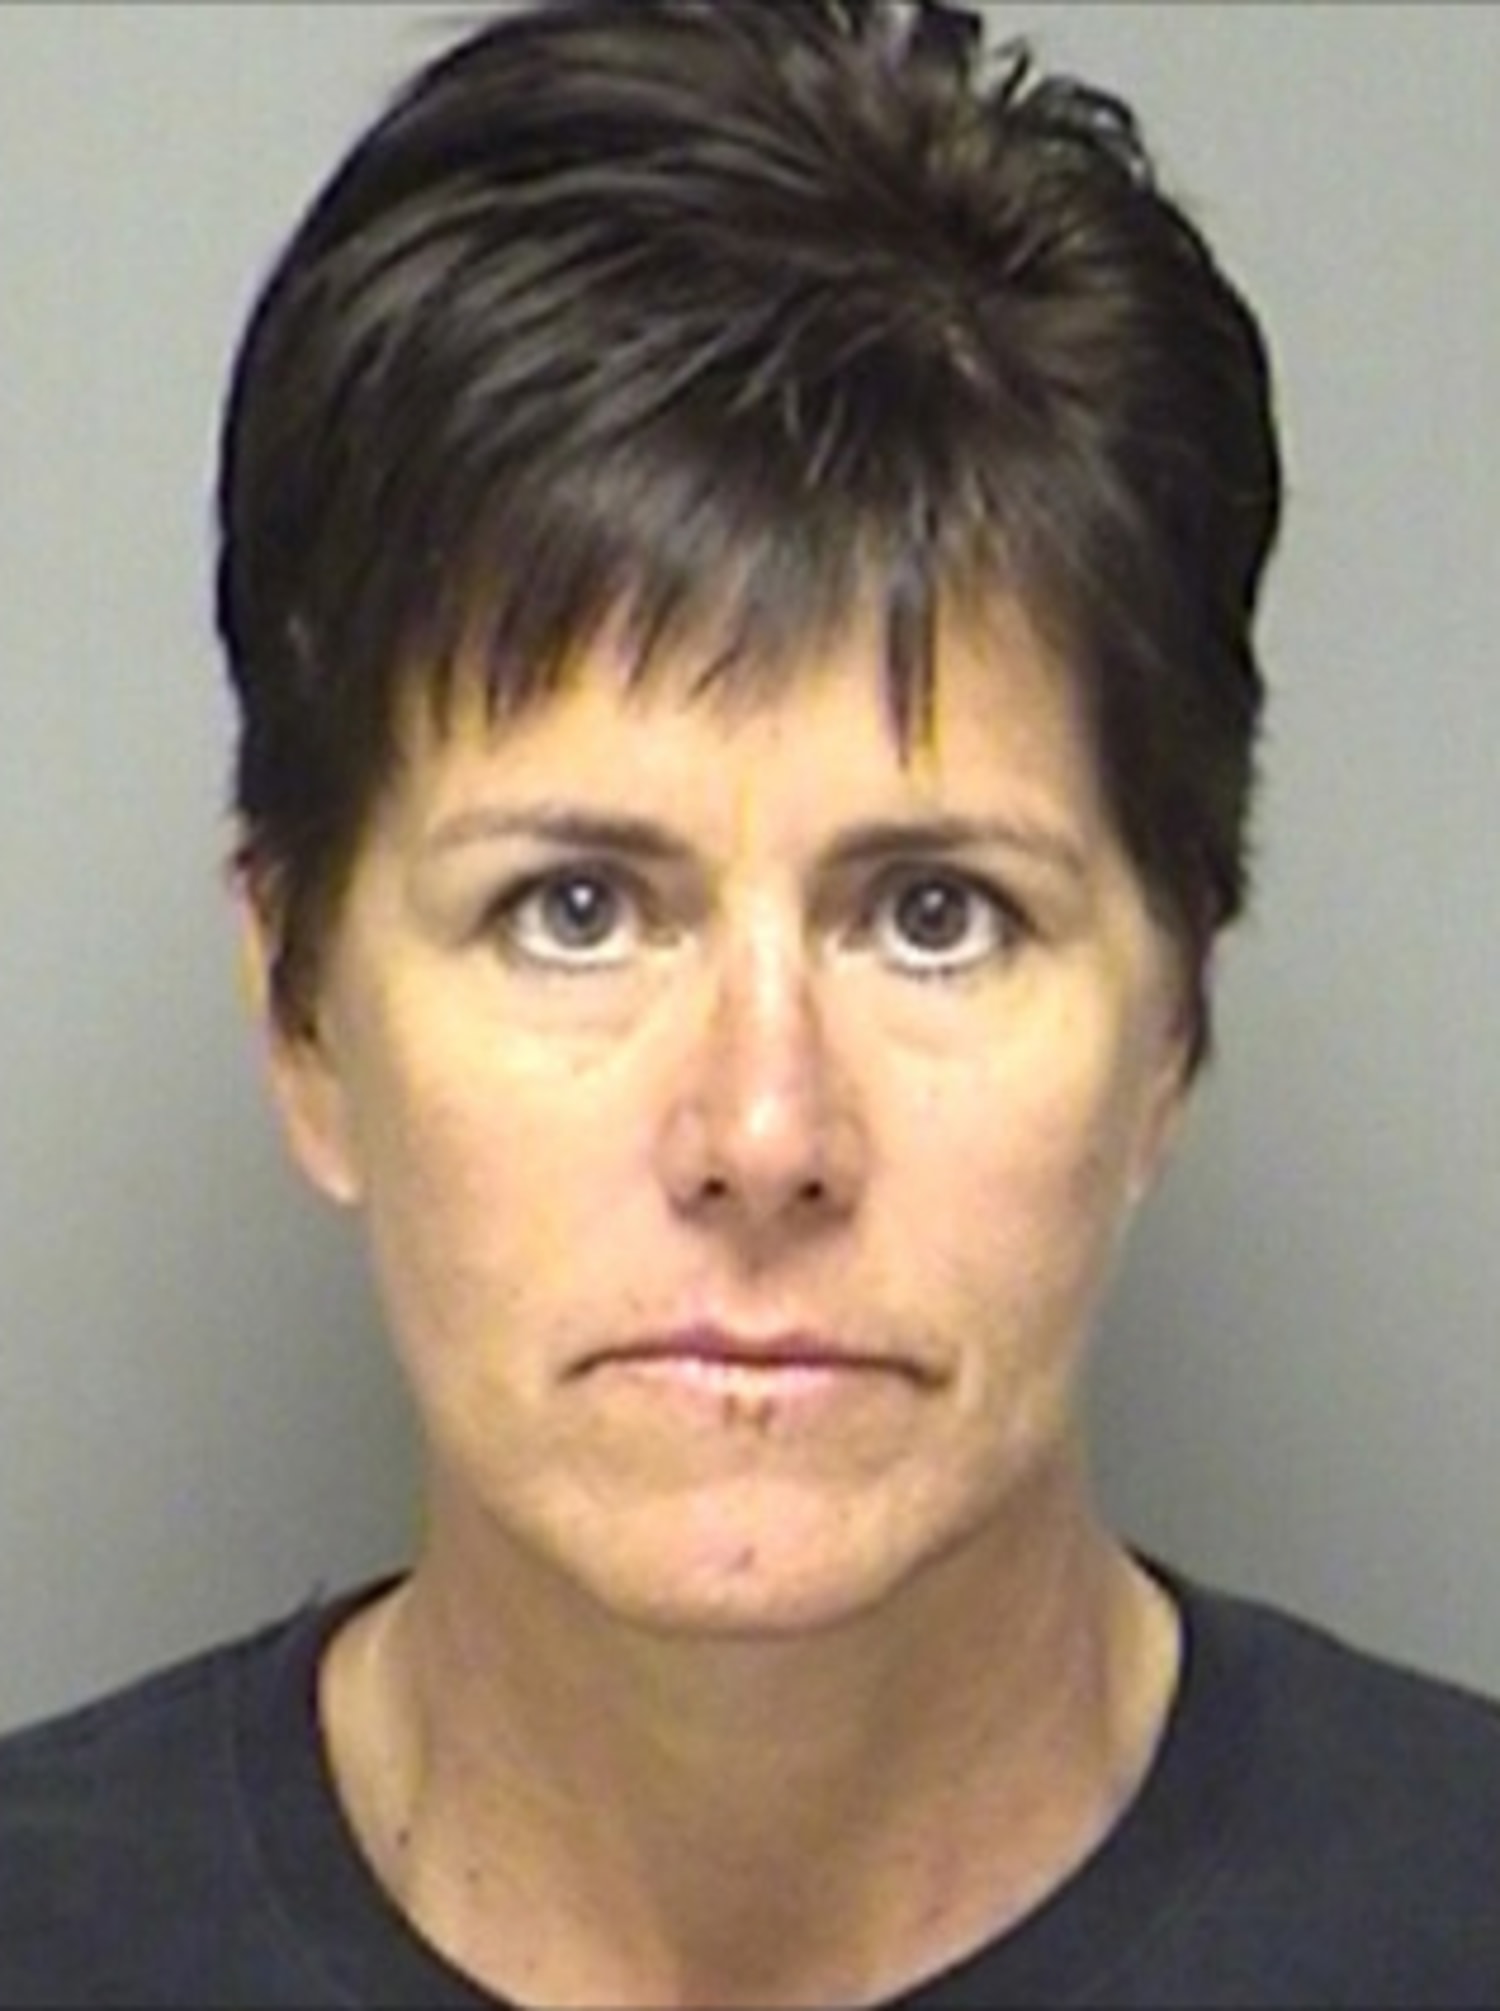 Texas principal charged in case involving cell phone recording in locker room